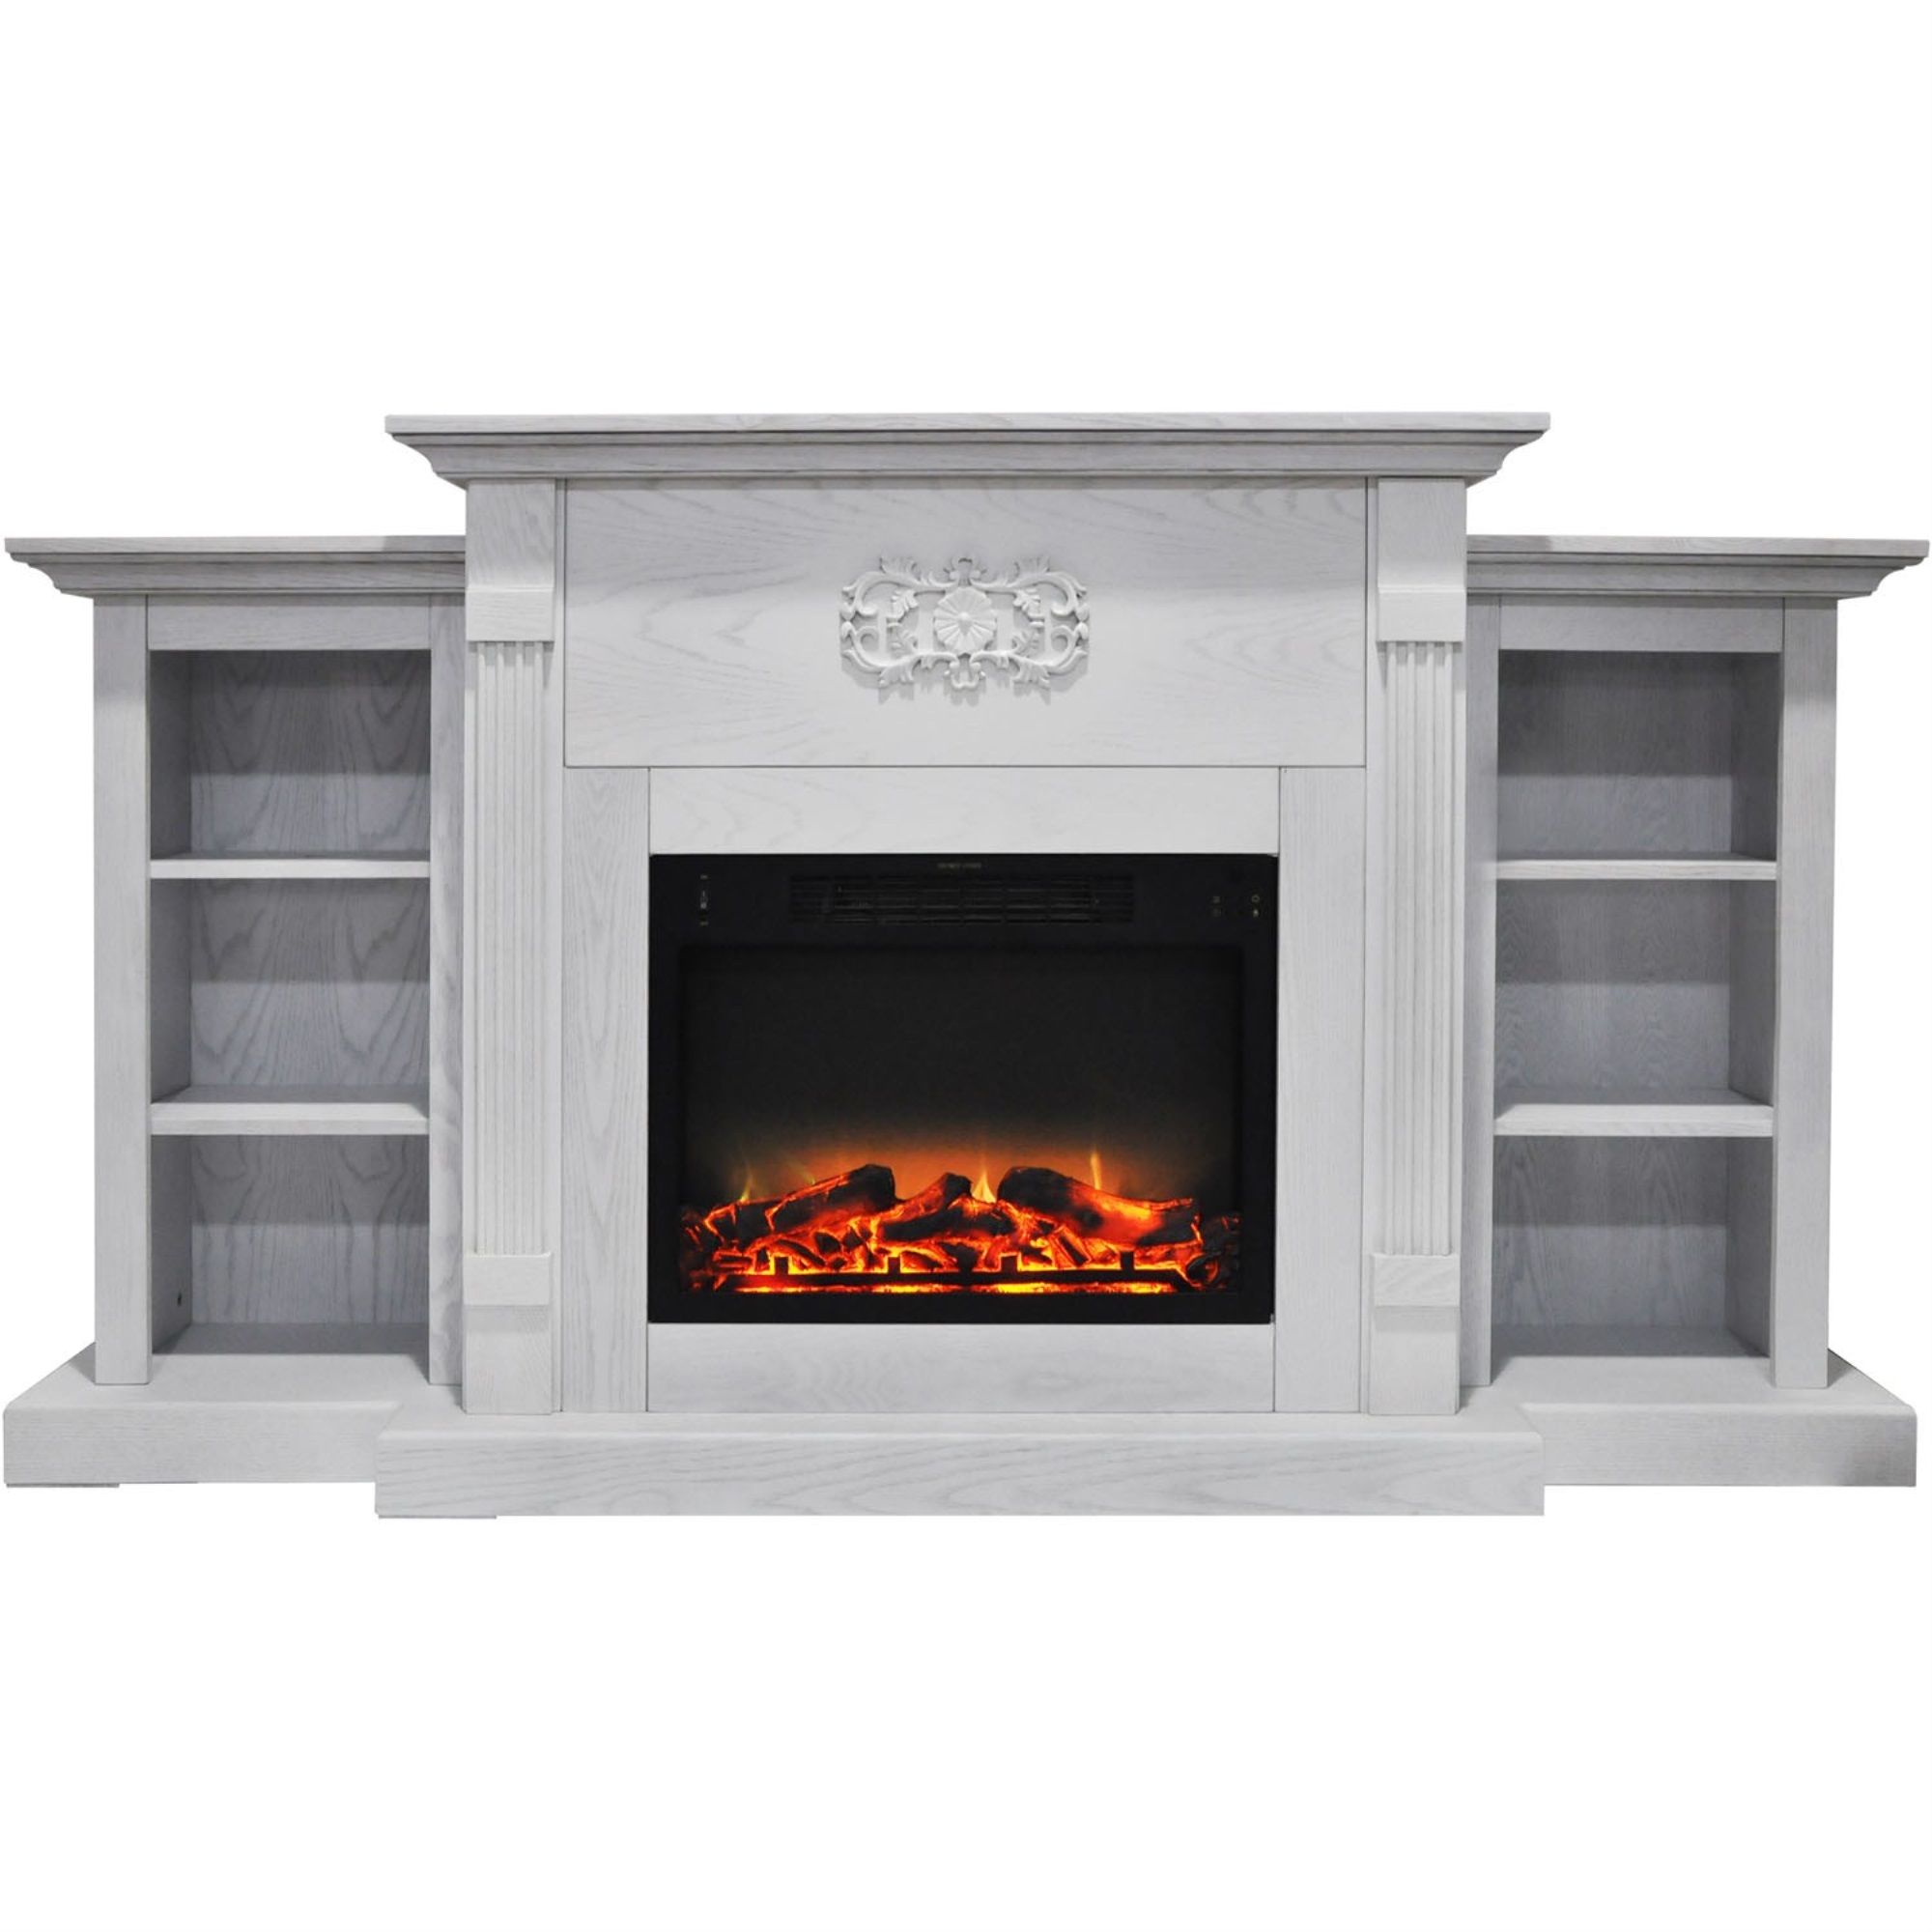 Cambridge 72 In. Electric Fireplace in White with Bookshelves and an Log Display